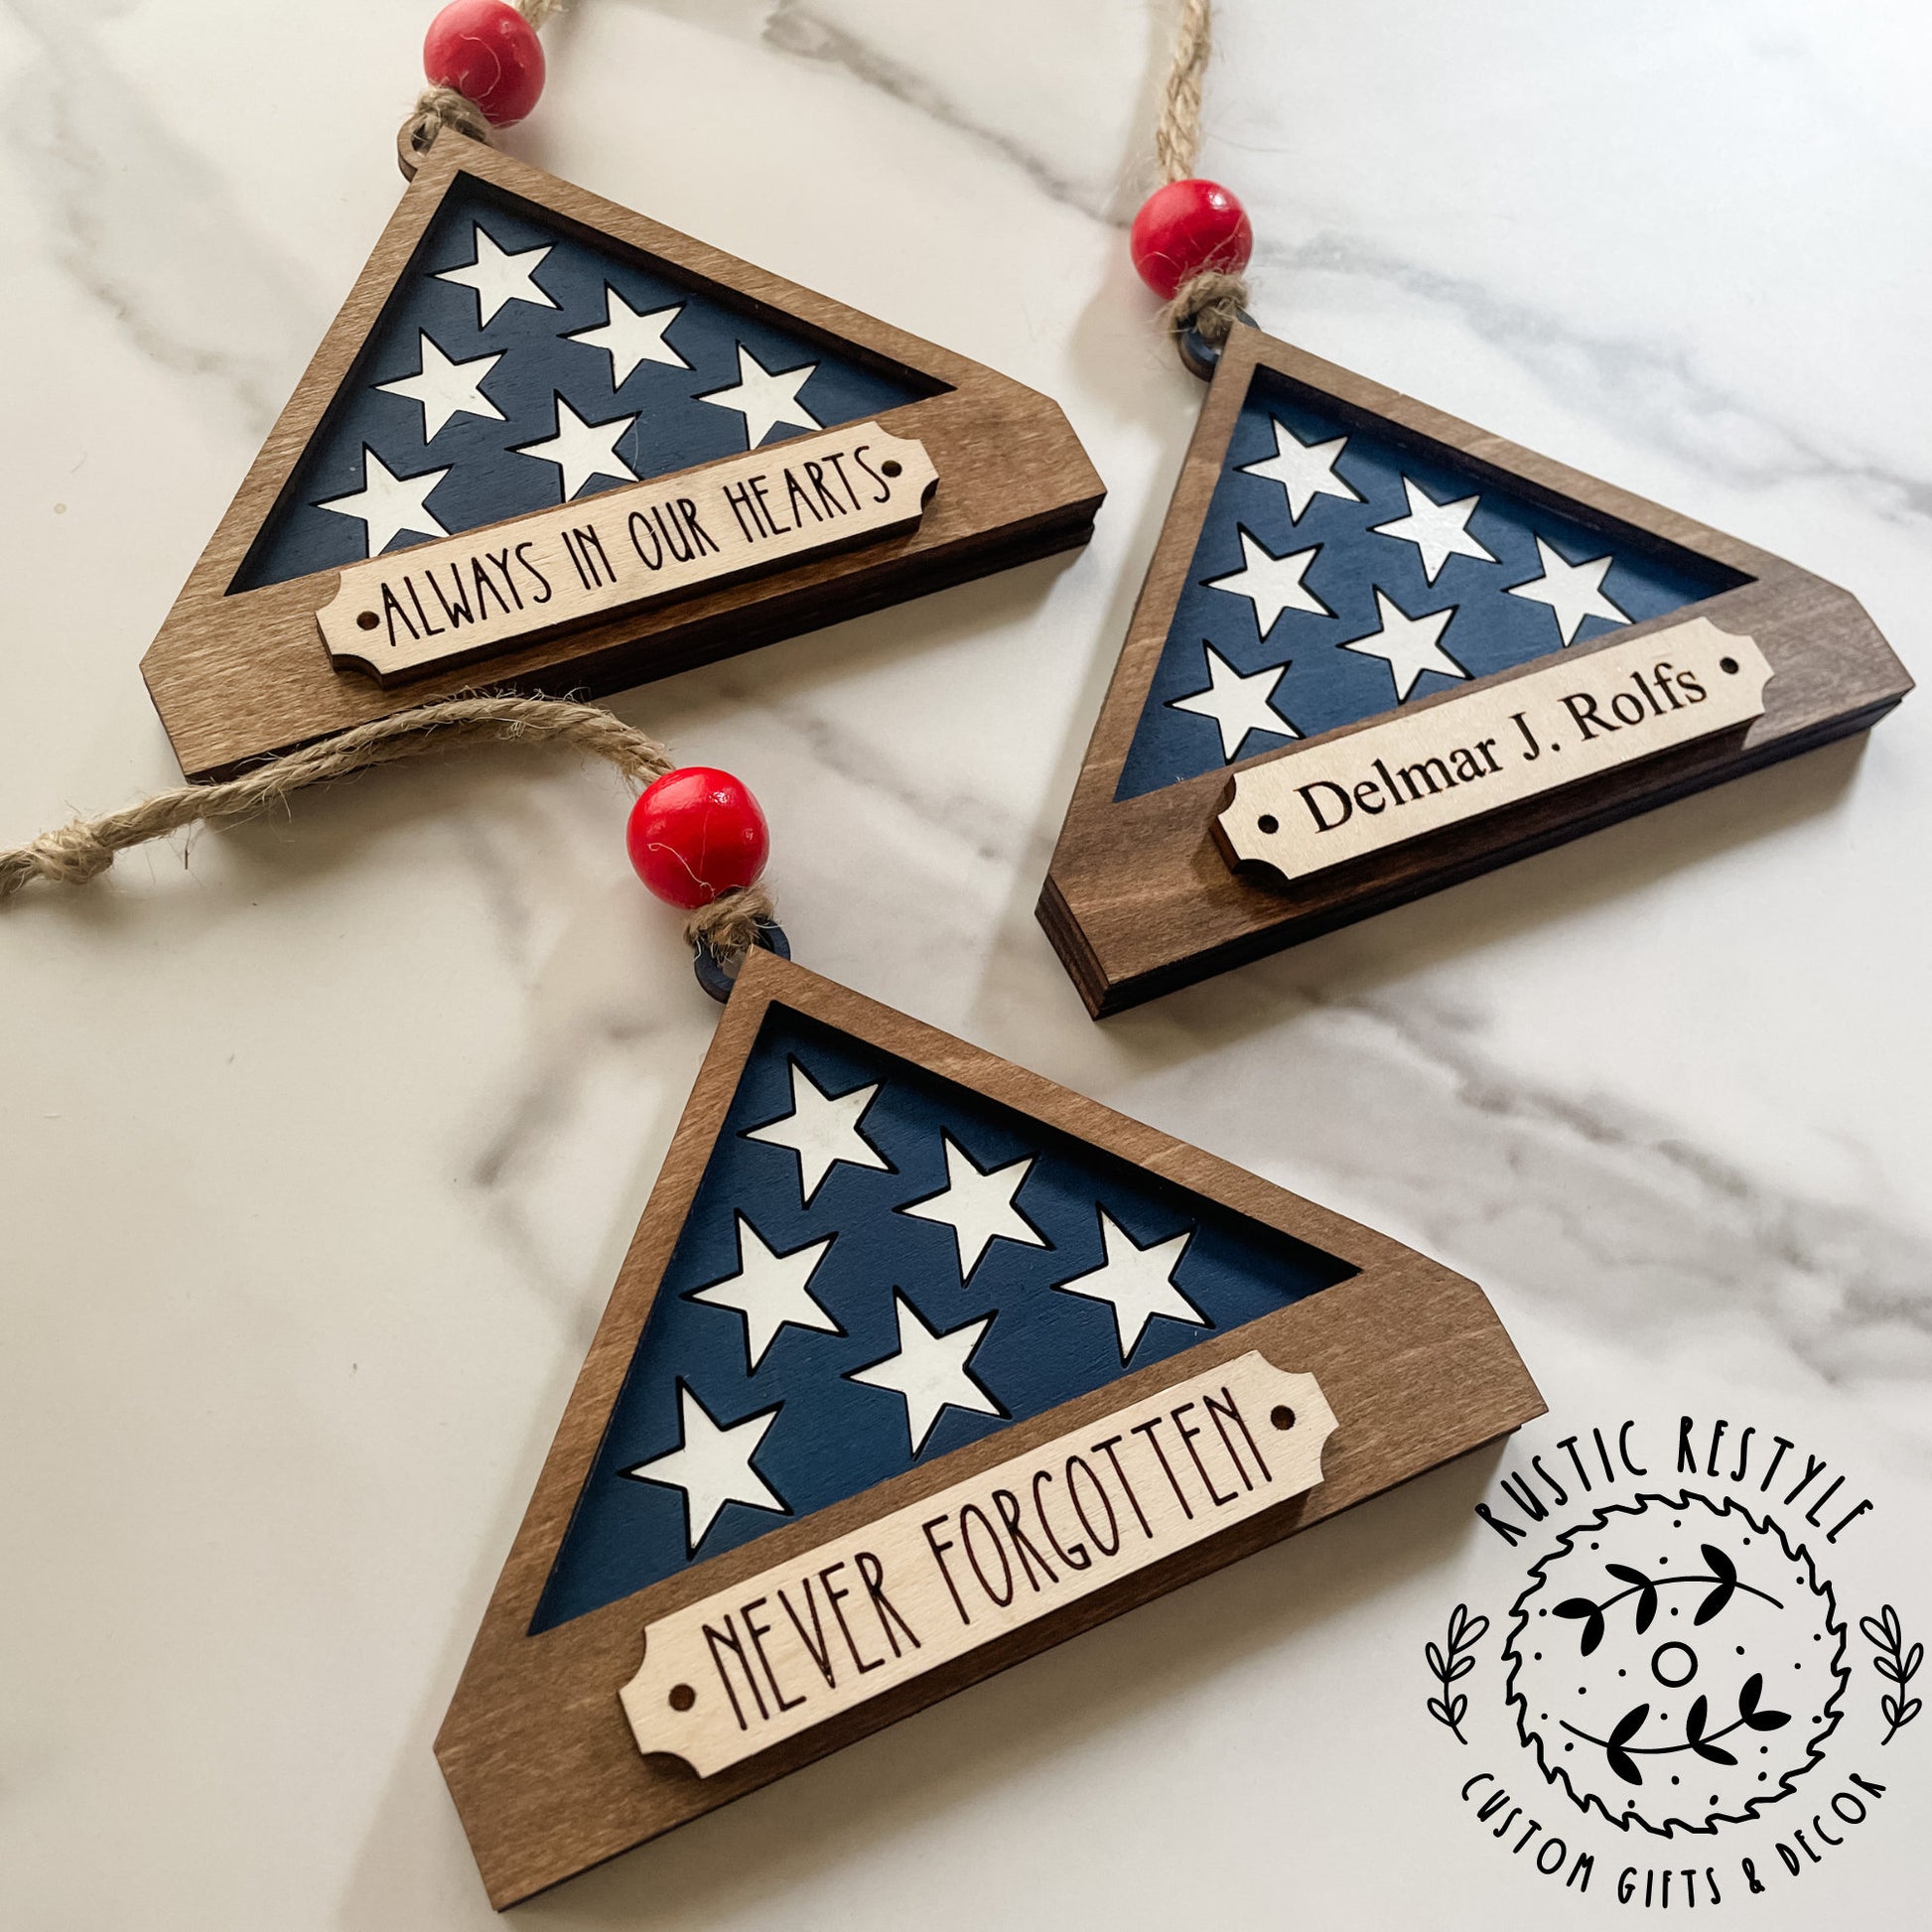 Military flag Remembrance ornament, personalized Memorial Christmas Ornament with engraved names